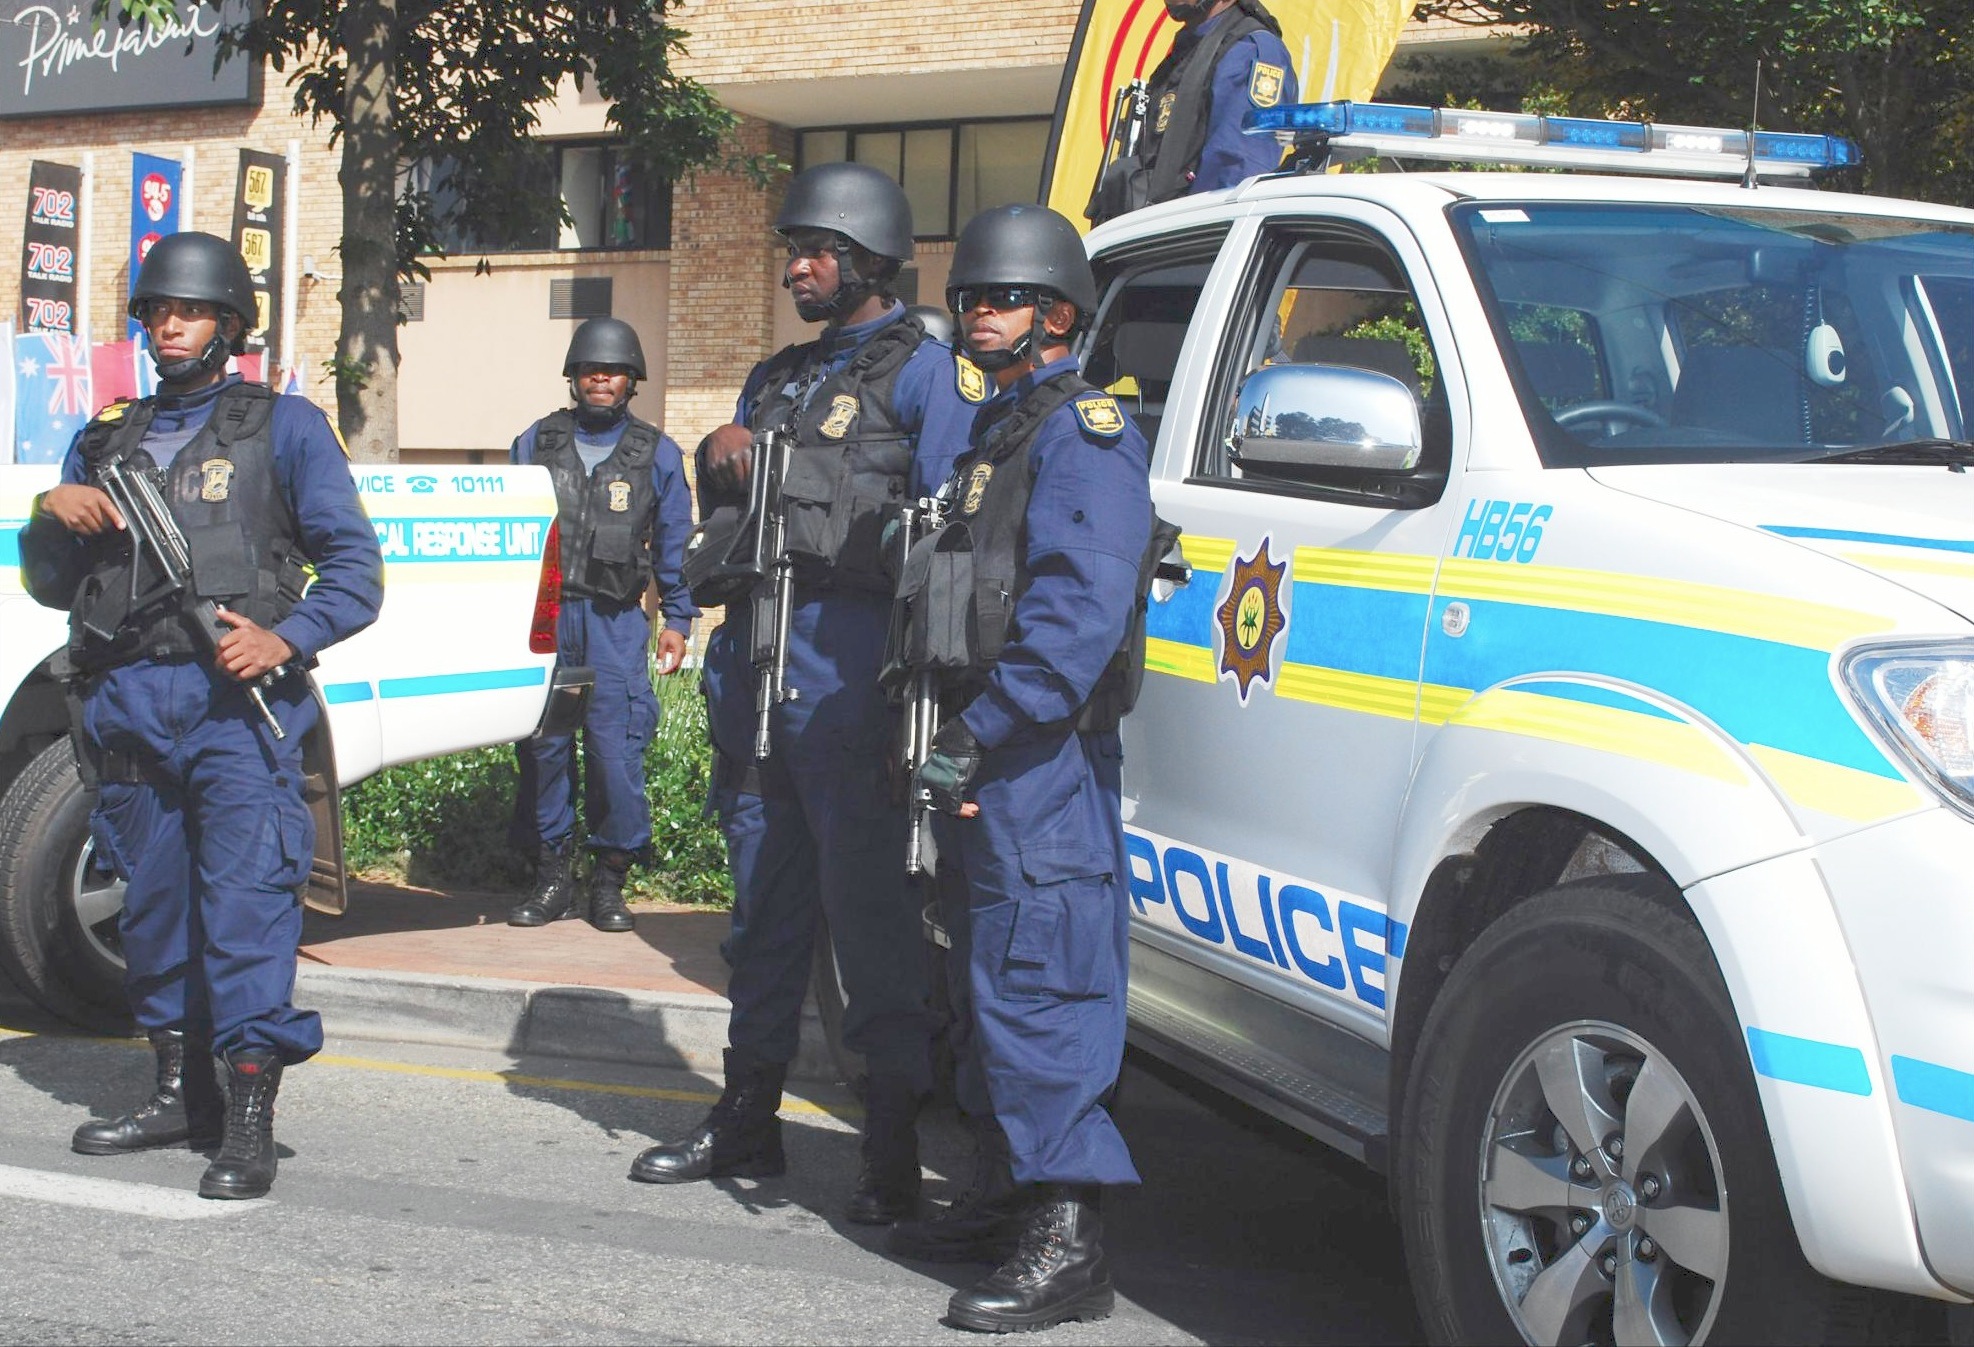 South_african_police_may_2010.jpg